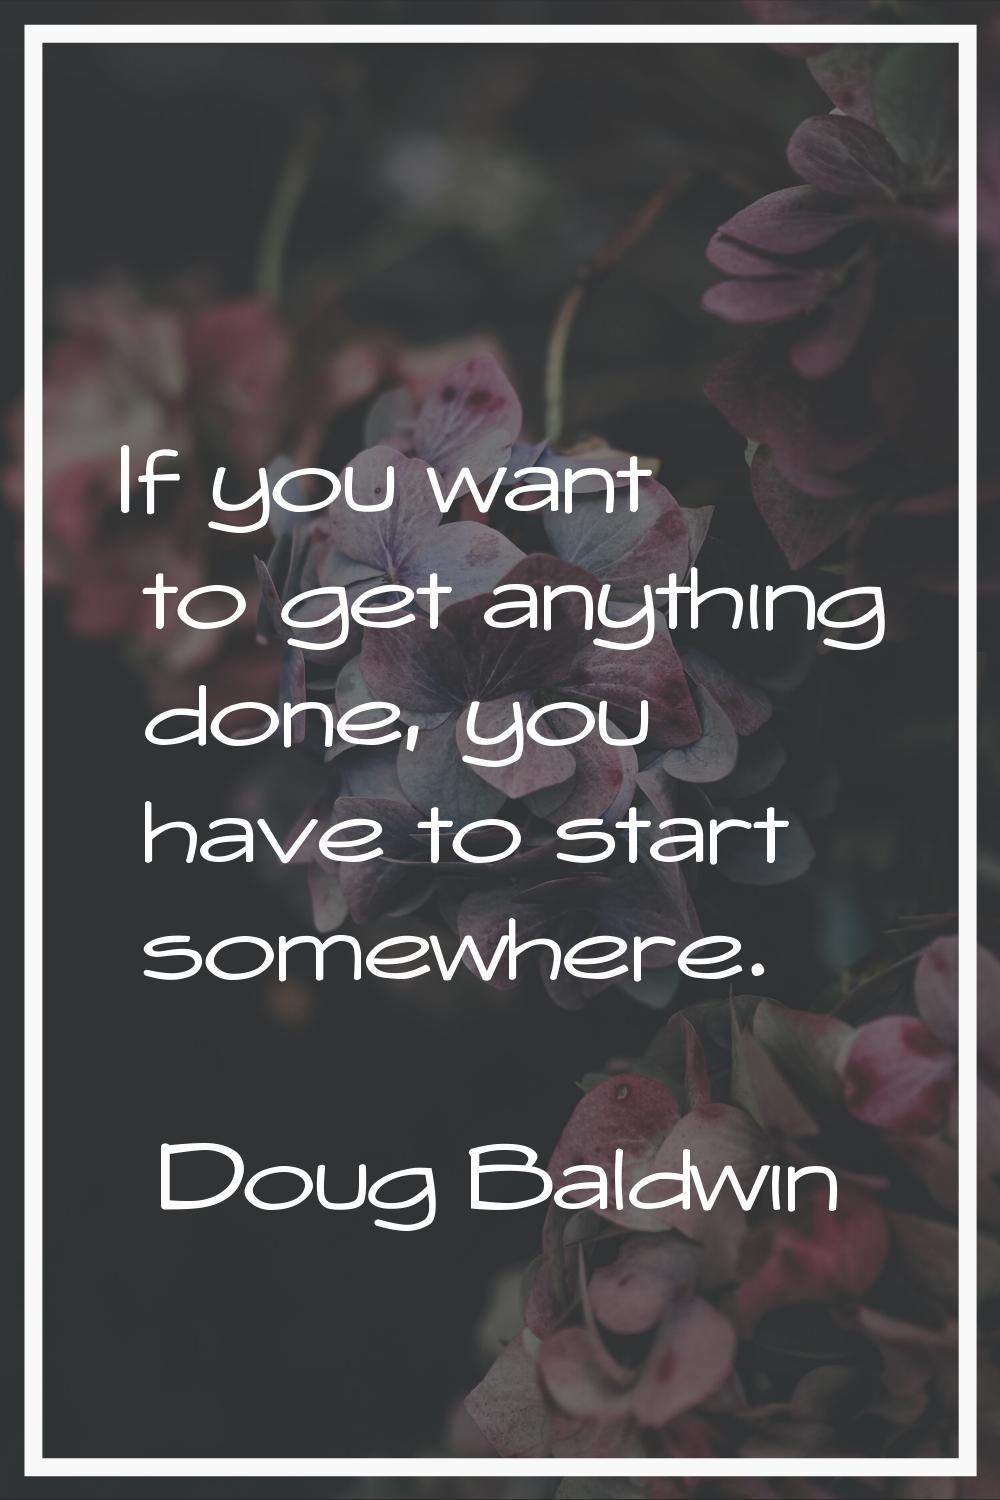 If you want to get anything done, you have to start somewhere.